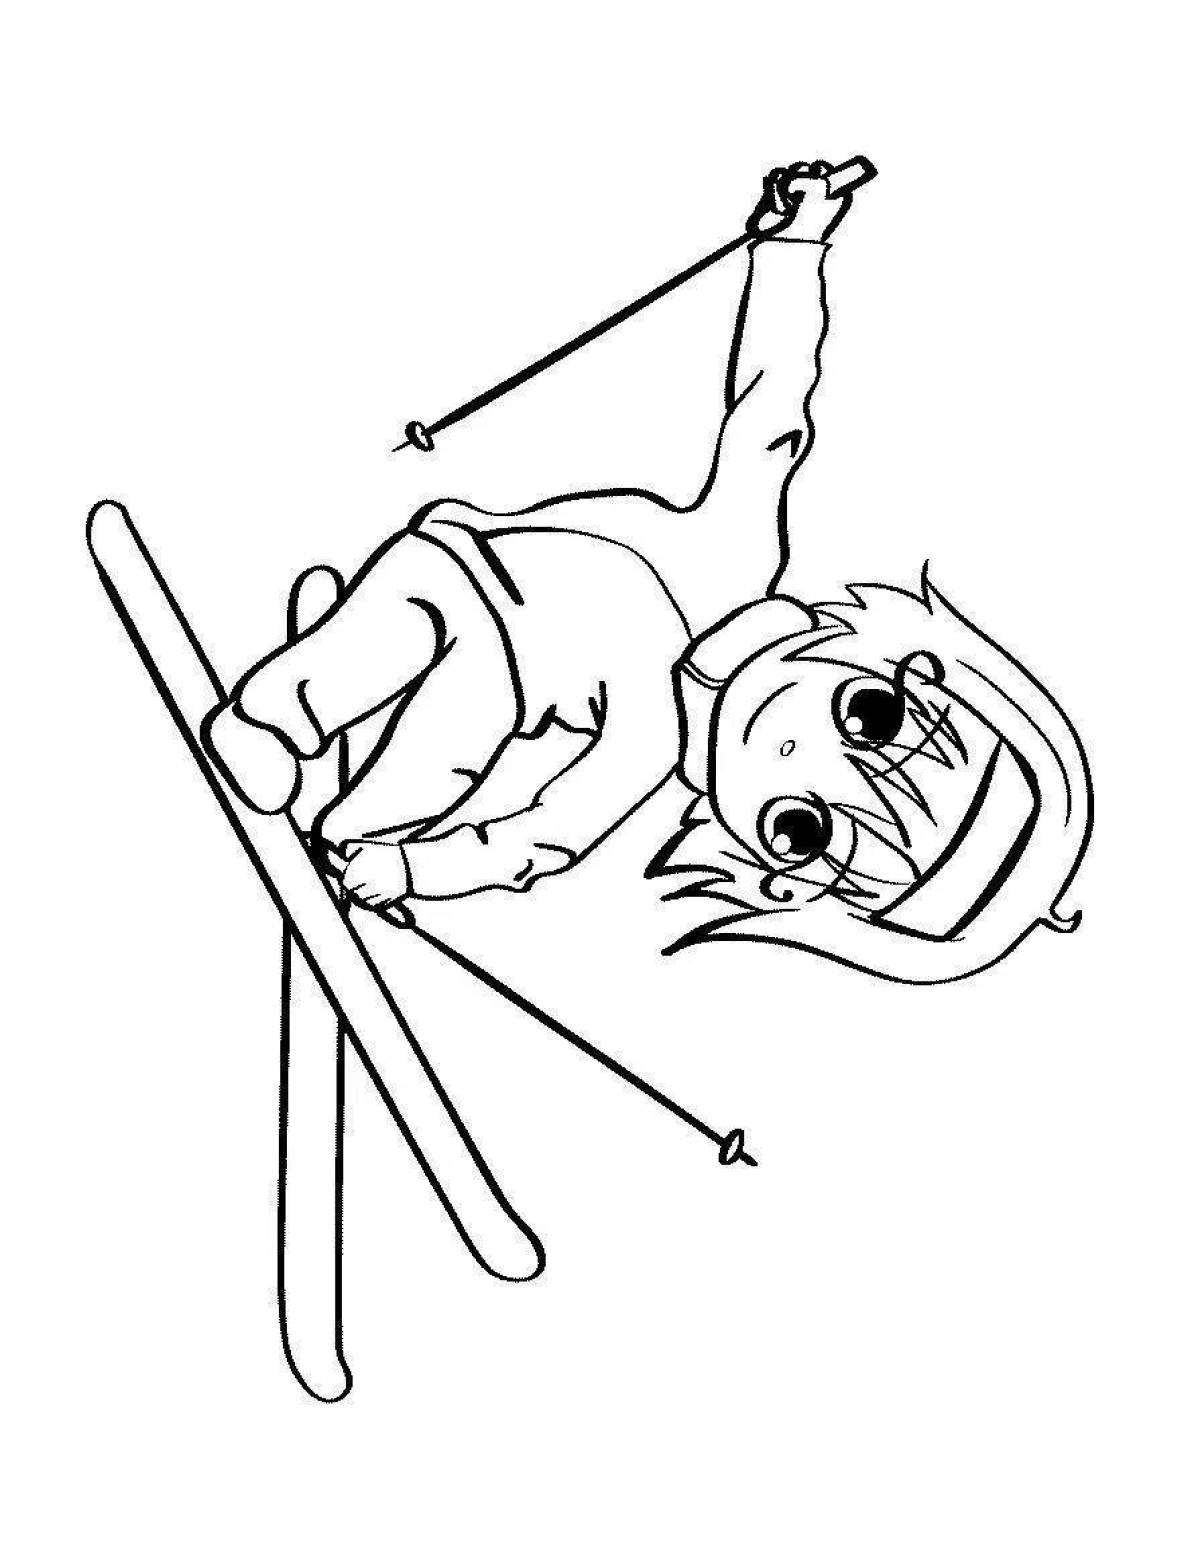 Coloring book exciting ski jumping